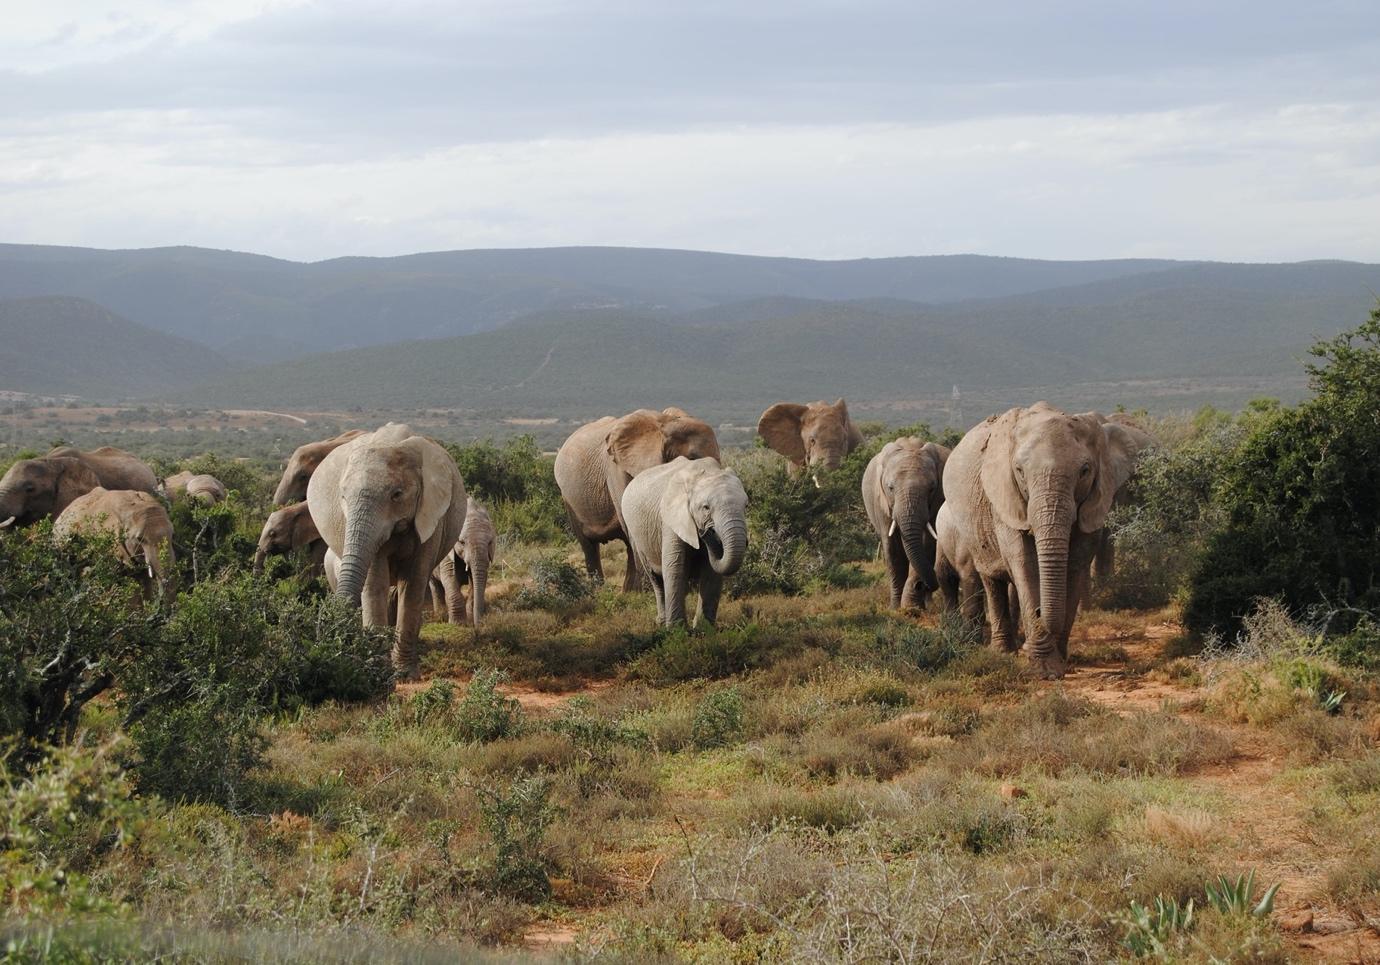 A herd of elephants in a field

Description automatically generated